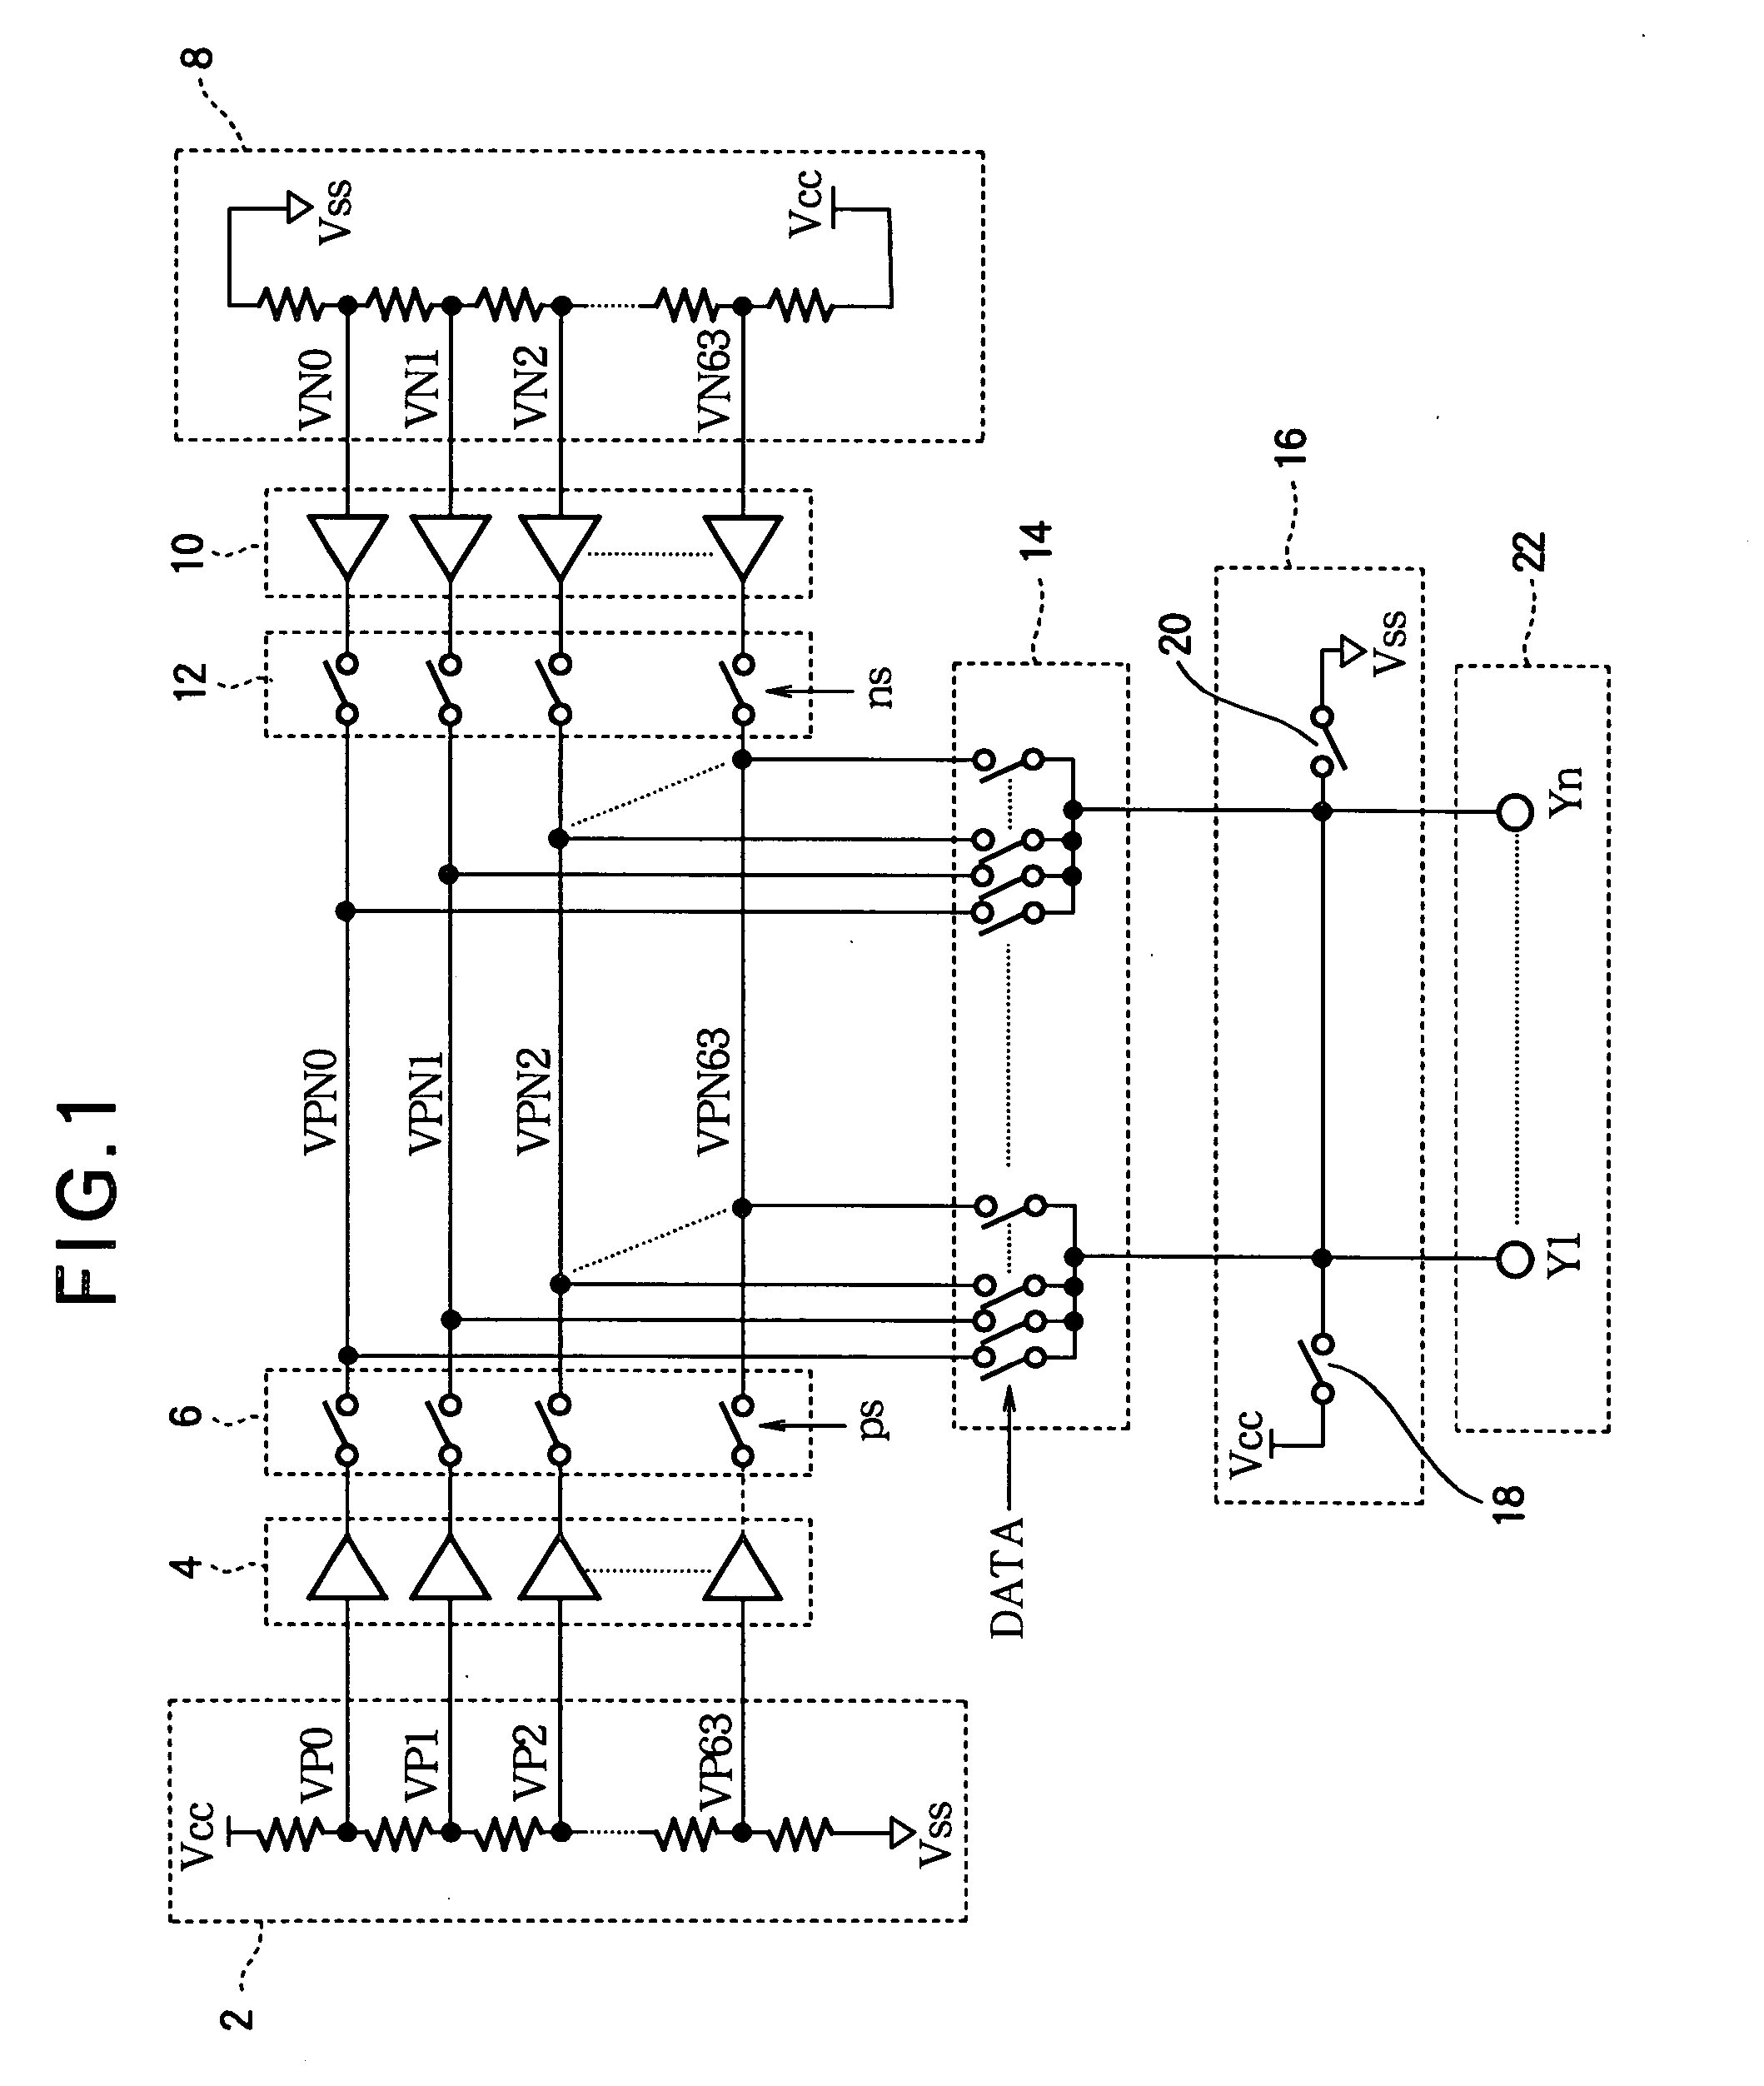 Voltage generating circuit with two resistor ladders